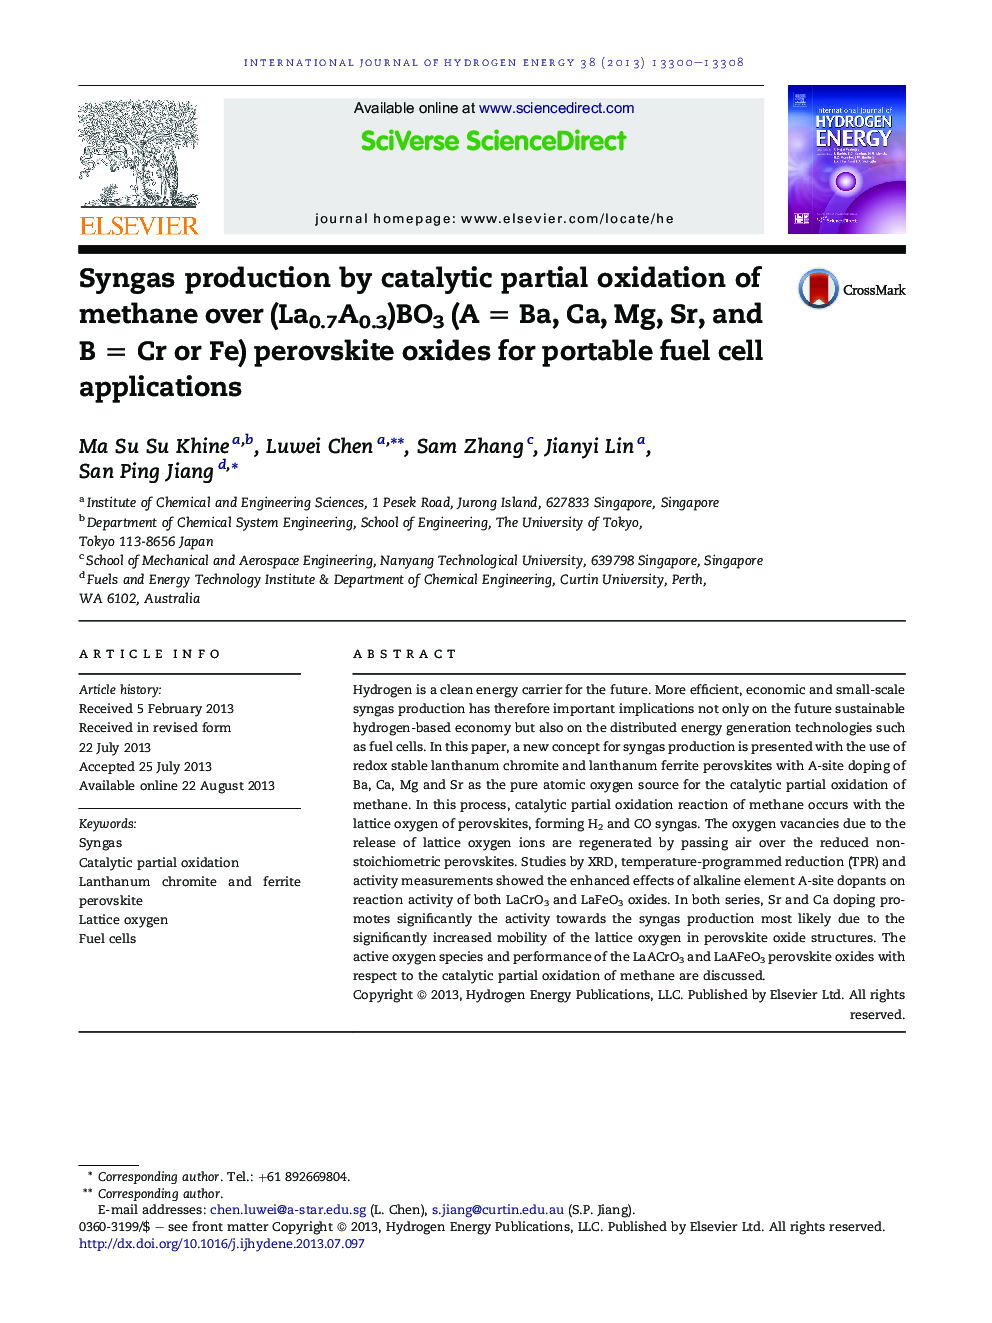 Syngas production by catalytic partial oxidation of methane over (La0.7A0.3)BO3 (A = Ba, Ca, Mg, Sr, and B = Cr or Fe) perovskite oxides for portable fuel cell applications